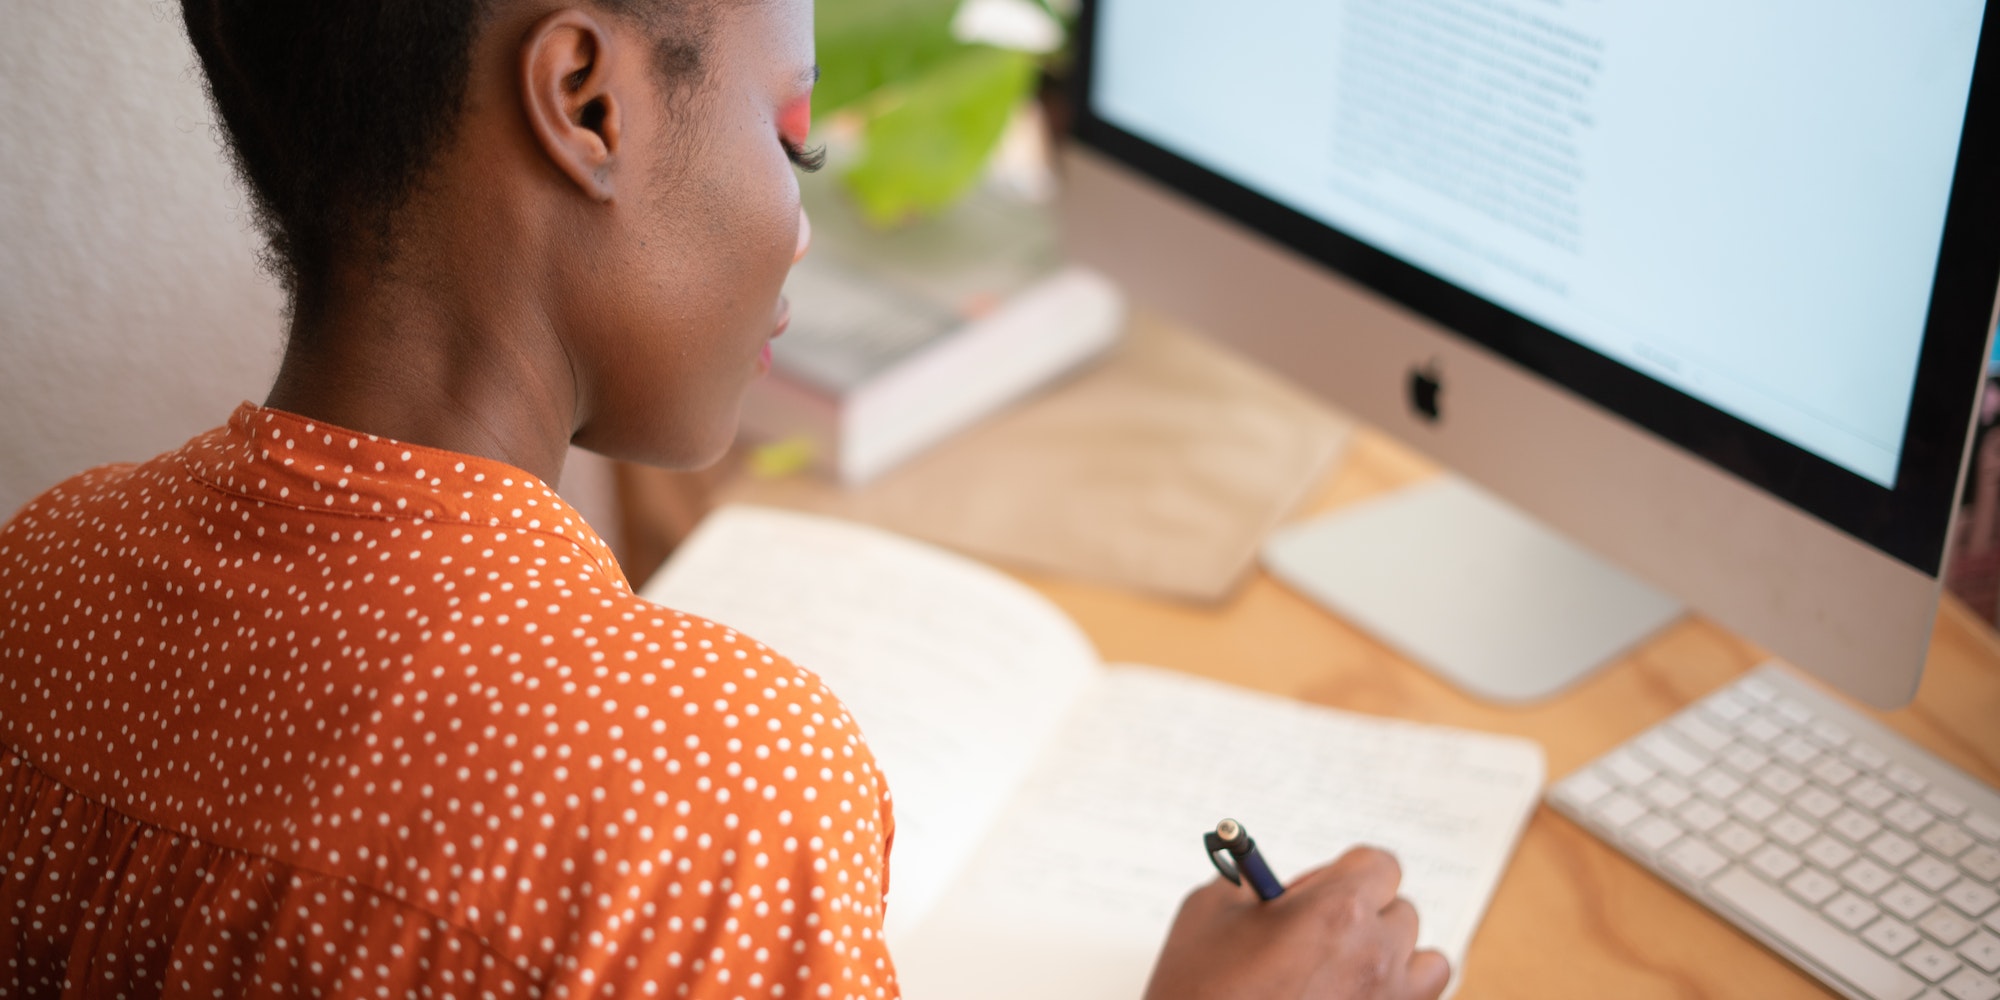 woman wearing orange shirt and matching eye shadow sitting in front of computer writing notes in a journal